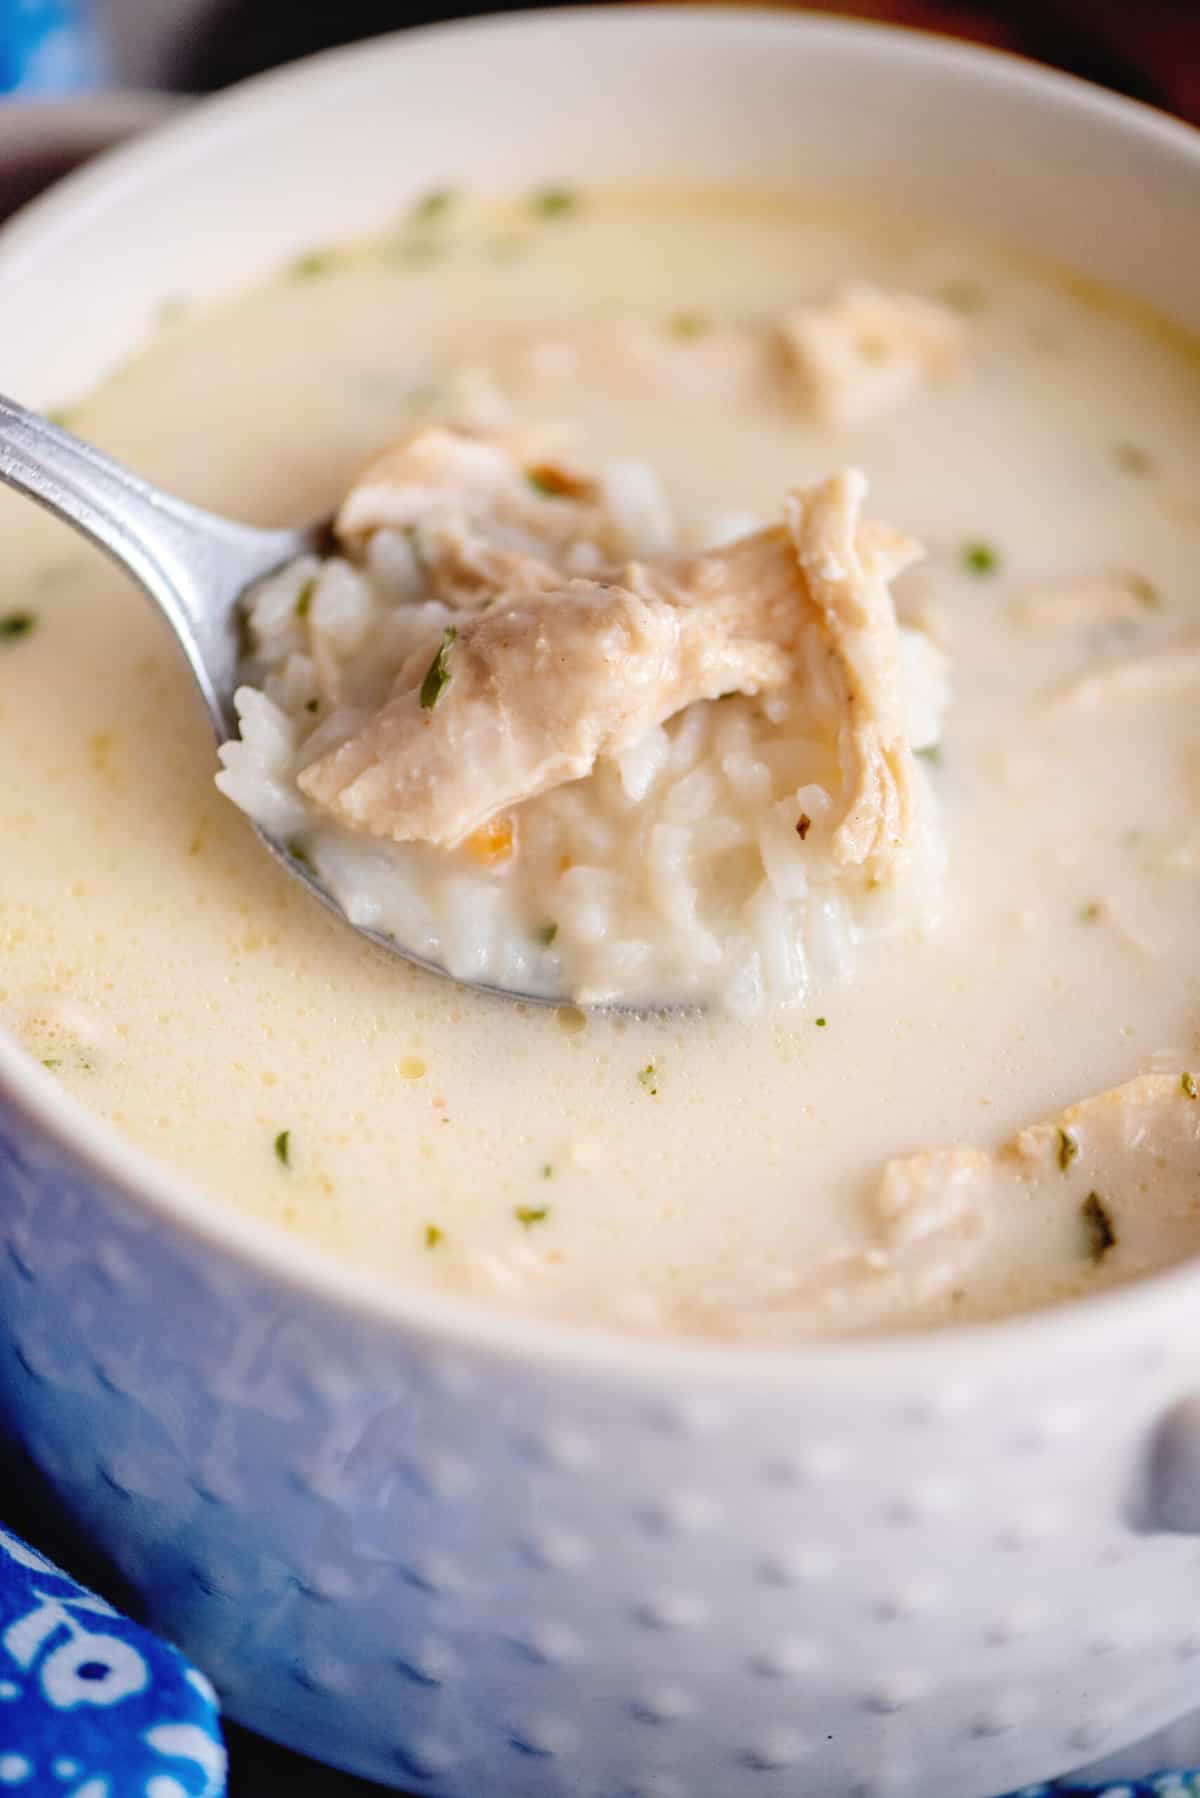 Easy Chicken and Rice Soup • Salt & Lavender